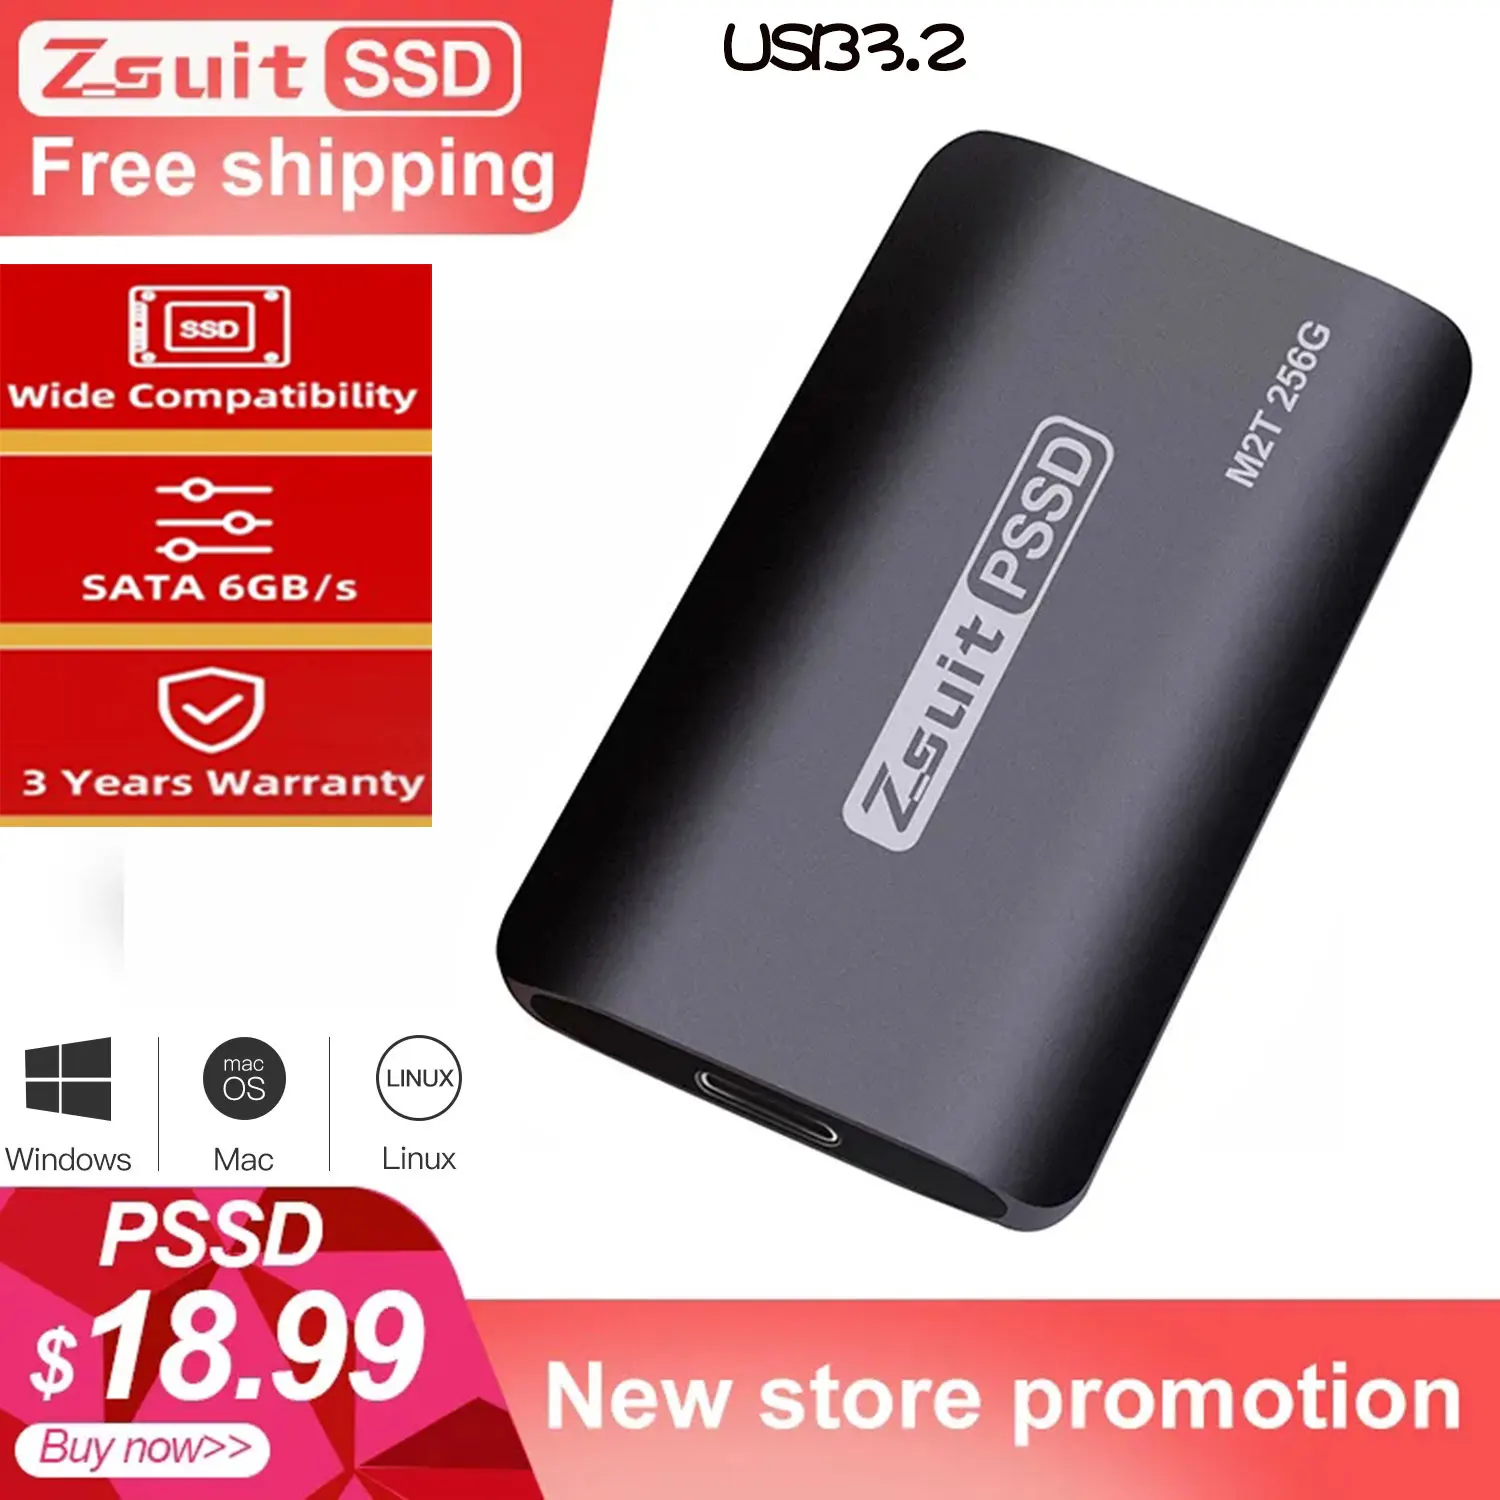 rijm sirene Onderling verbinden Zsuit External Ssd 128gb Portable Solid State Drive Hdd 256gb 1tbssd Hard  For Laptop Desktop With Type-c Usb 3.2 - Portable Solid State Drives -  AliExpress